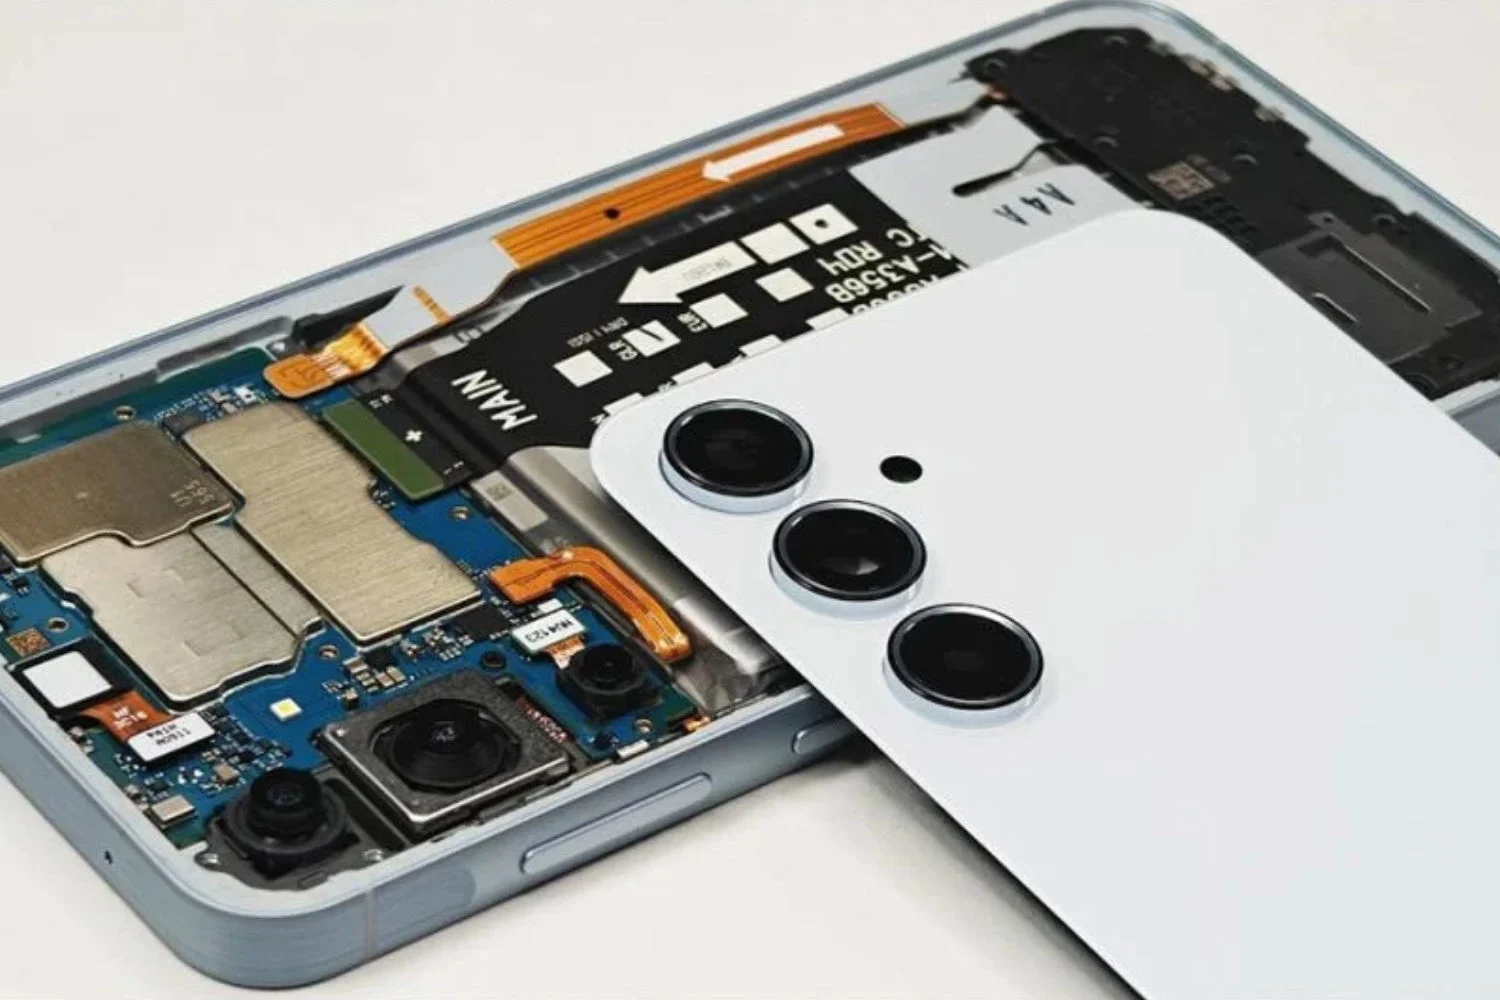 iFixit stops working with Samsung due to high prices and parts availability issues